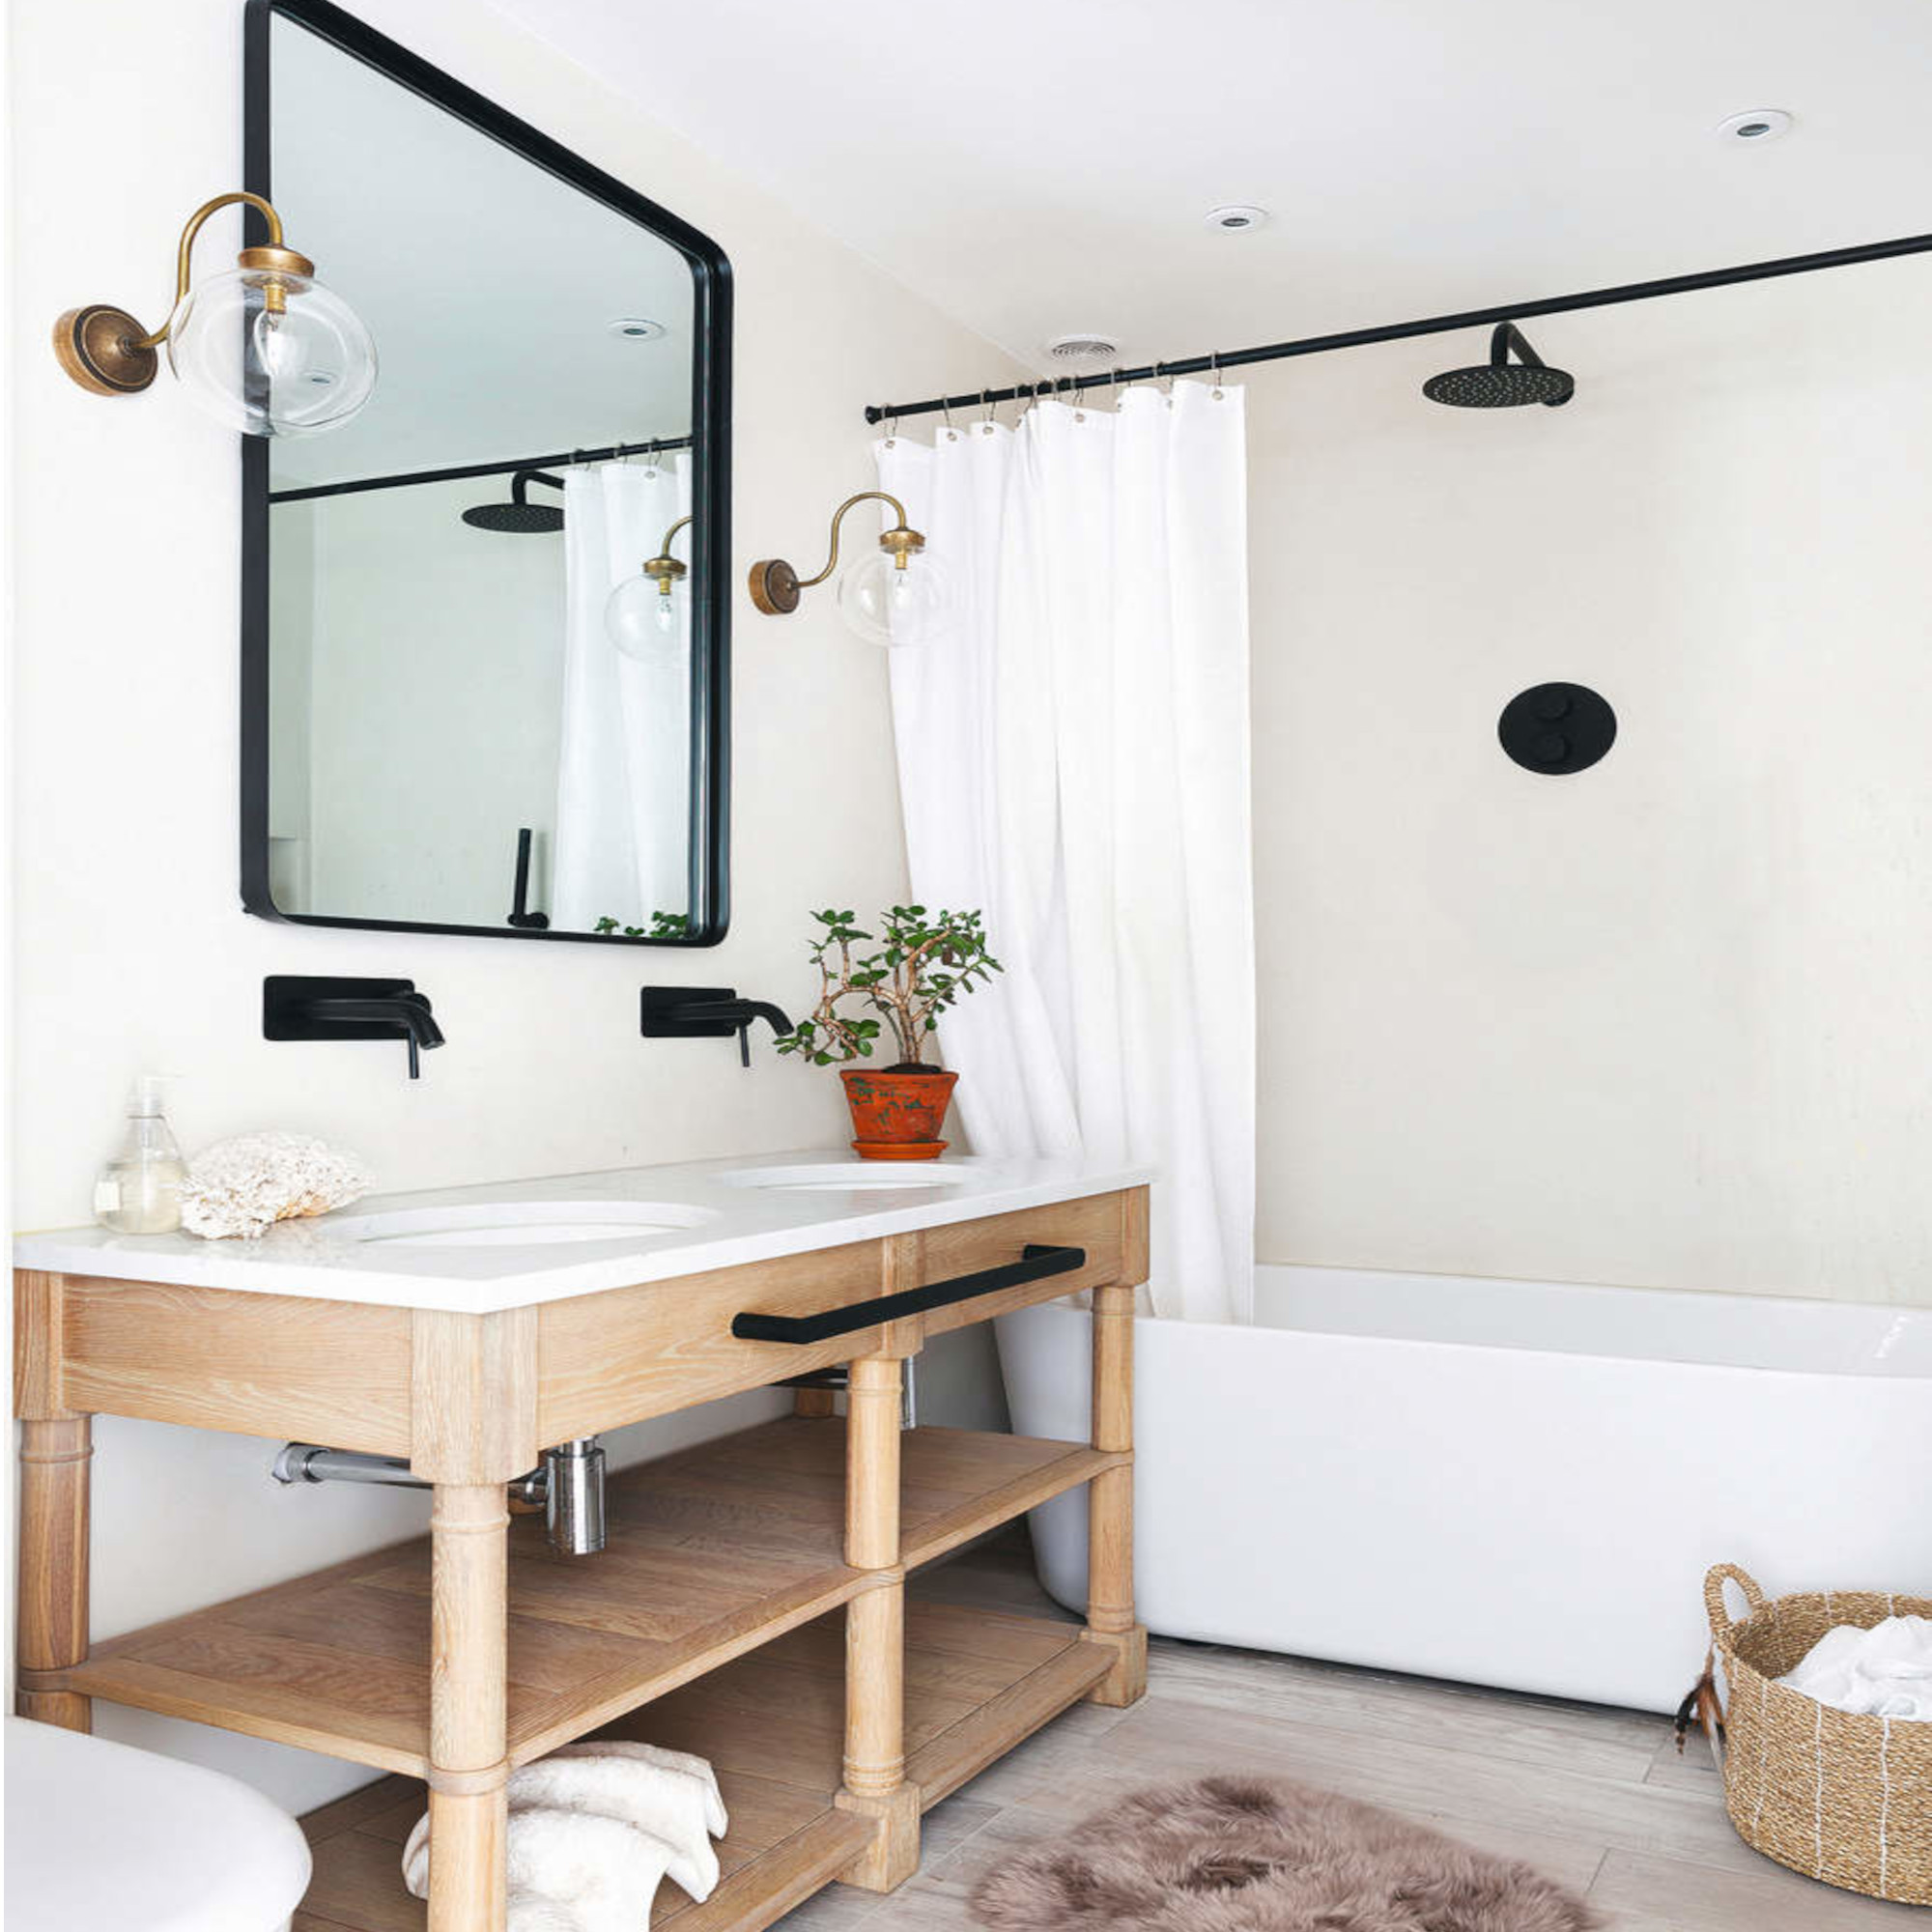 Bathroom Storage Ideas To Keep Your Space Clutter-Free | Ideal Home